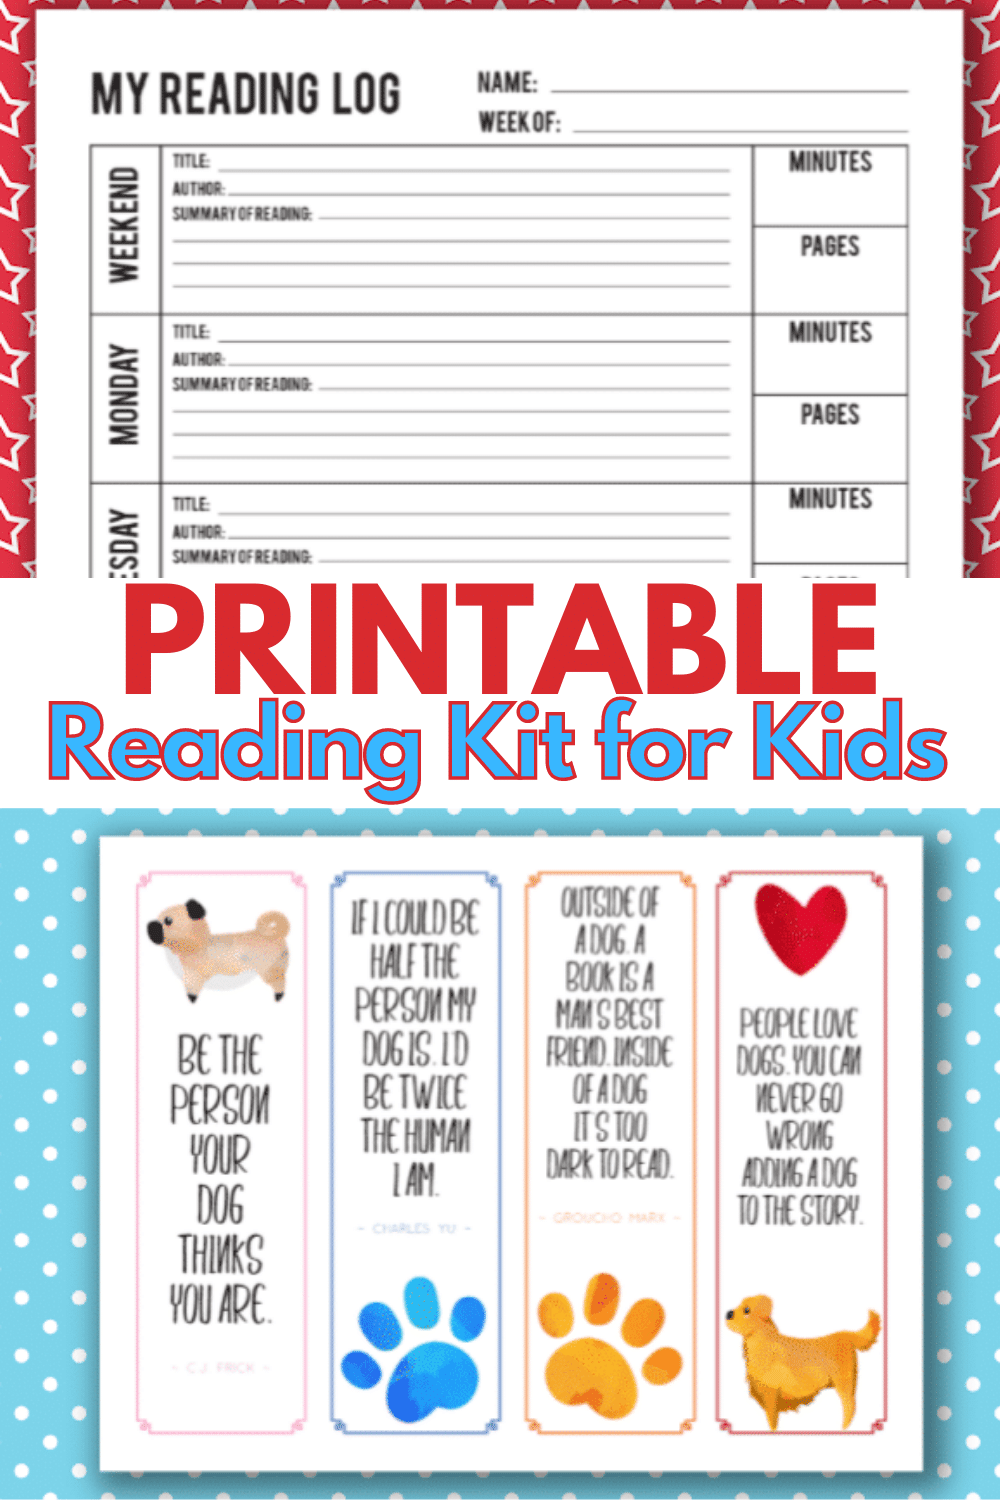 A printable reading kit for kids will help kids stay focused on reading all summer long. A reading log, book report form and bookmarks make this kit great. #printables #reading #education via @wondermomwannab